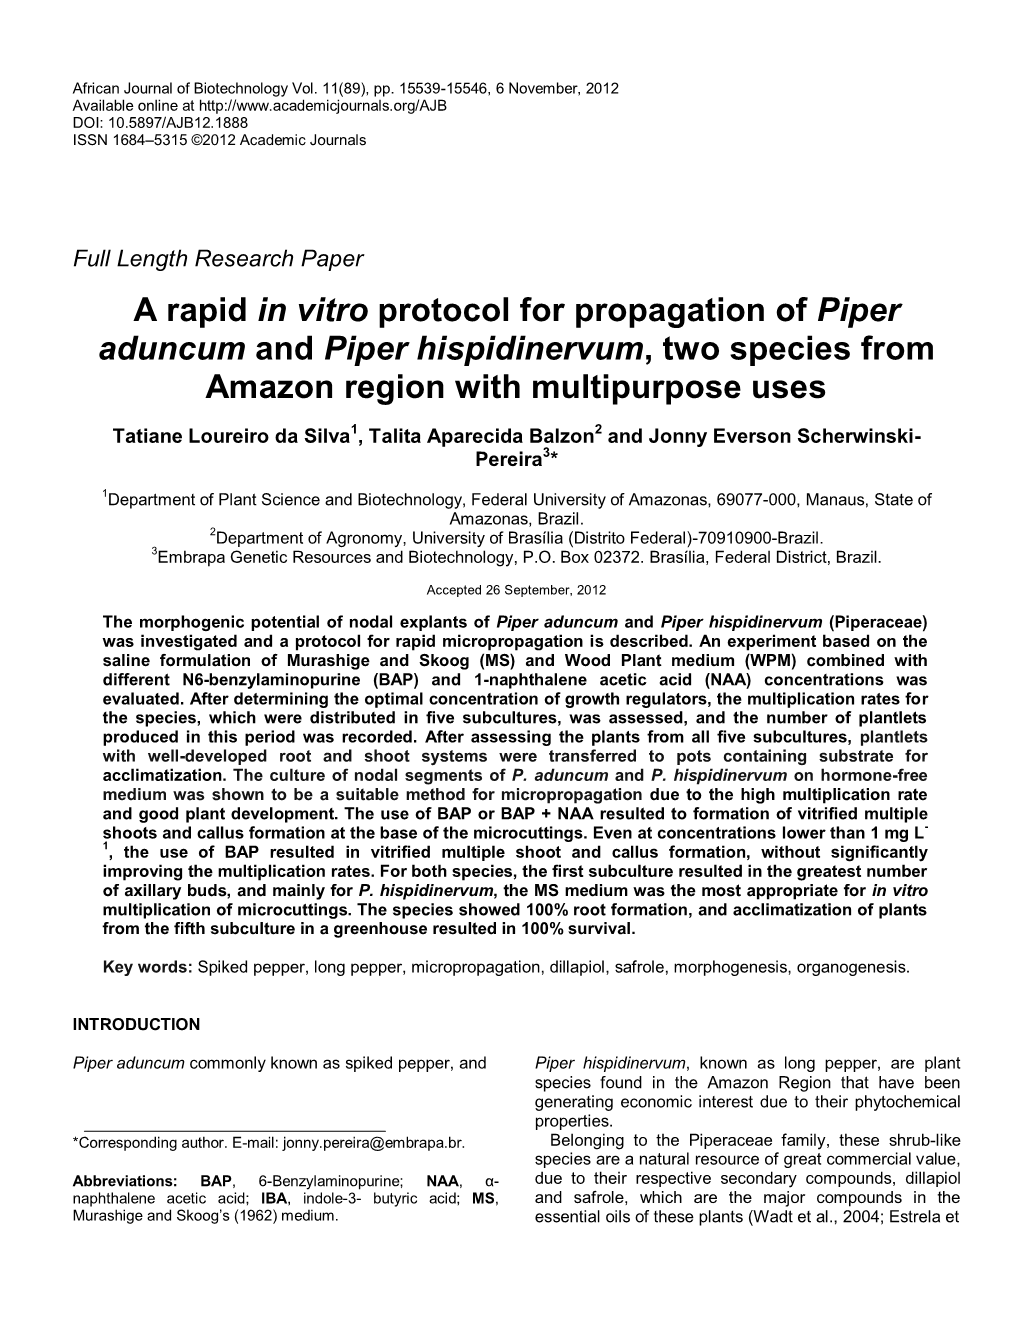 A Rapid in Vitro Protocol for Propagation of Piper Aduncum and Piper Hispidinervum, Two Species from Amazon Region with Multipurpose Uses